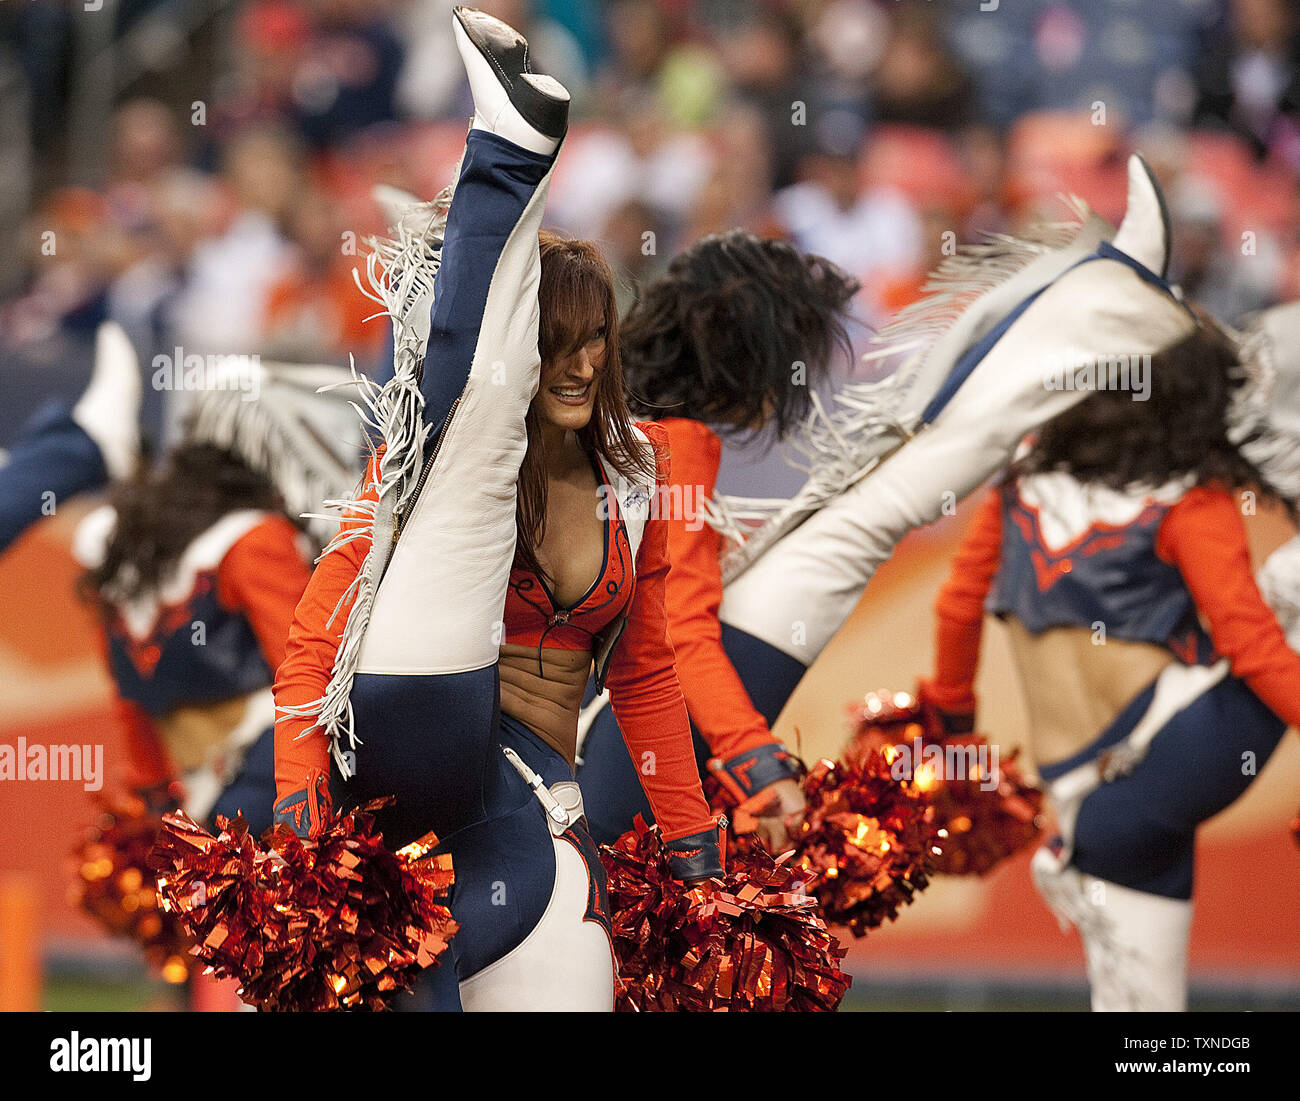 The Denver Broncos cheerleaders perform between quarters during the second half against the Oakland Raiders at Invesco Field at Mile High on October 24, 2010 in Denver.   The Raiders decimated the Broncos 59-14.         UPI/Gary C. Caskey Stock Photo